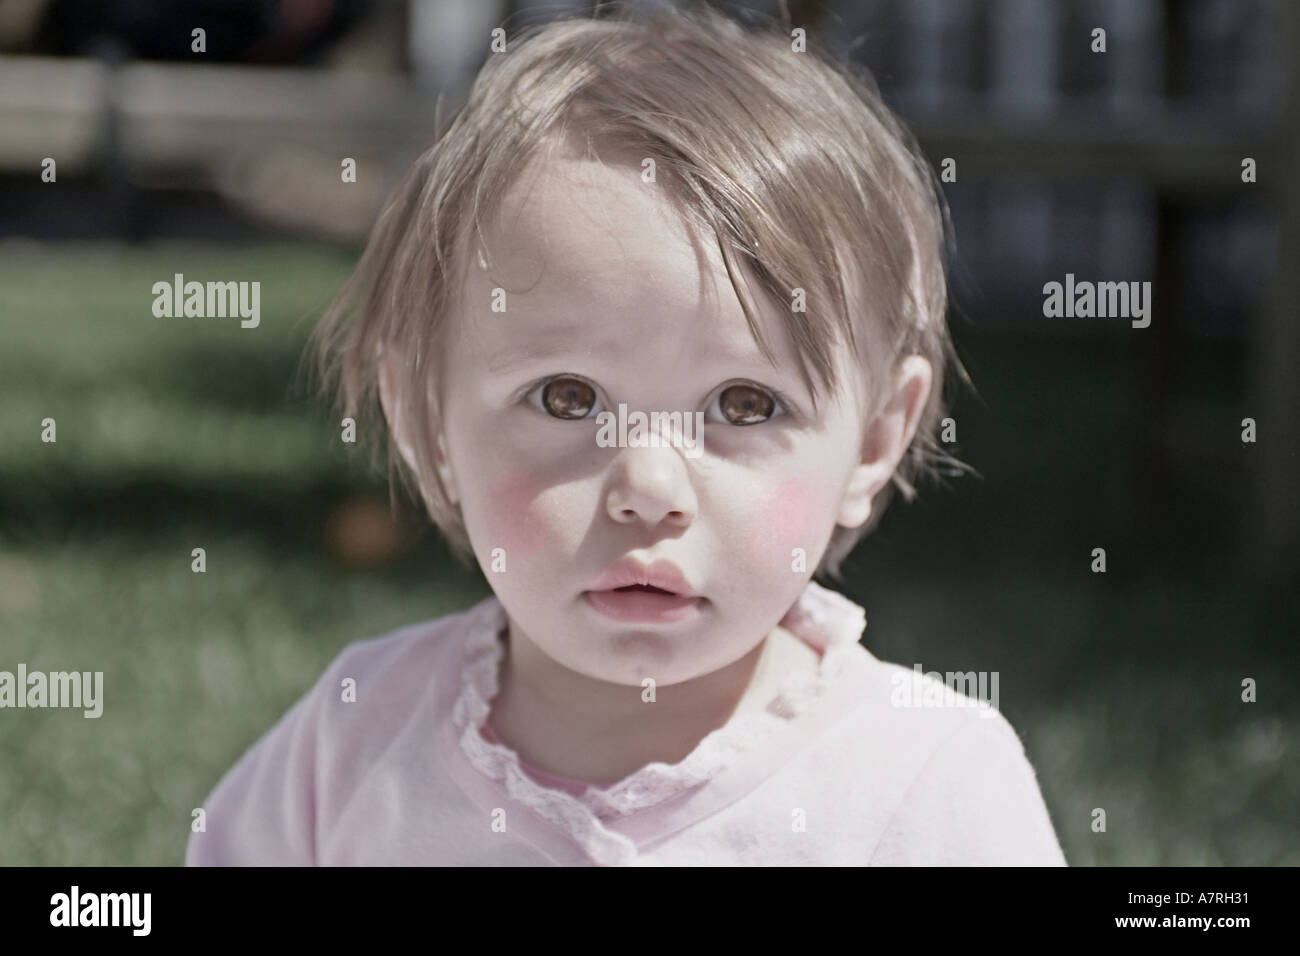 Little baby girl that looks like doll colorized image. Stock Photo